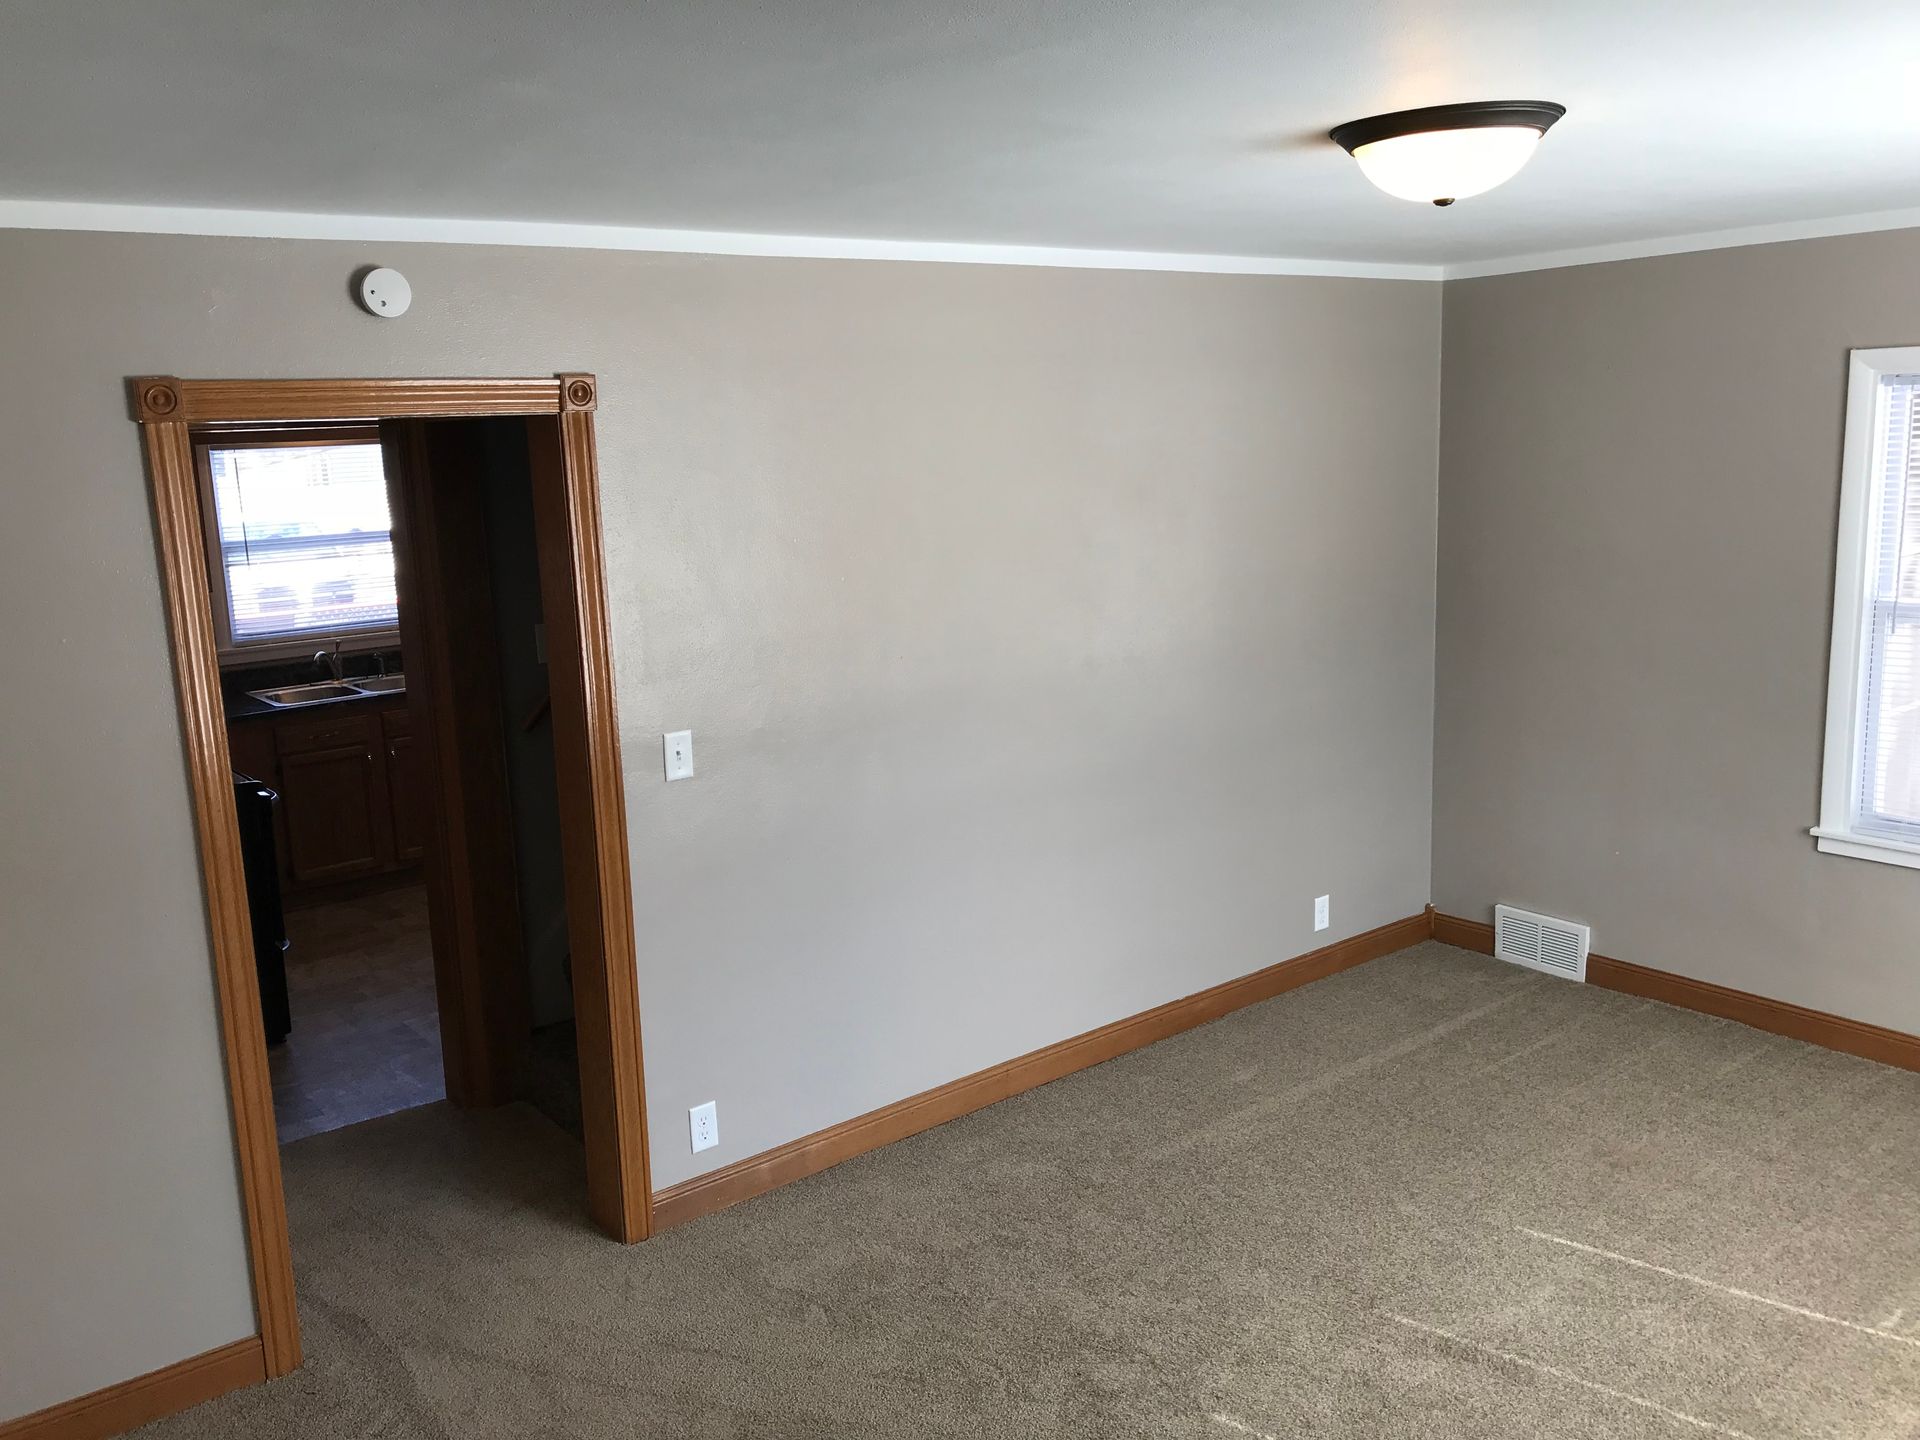 An empty living room with a doorway leading to a kitchen.